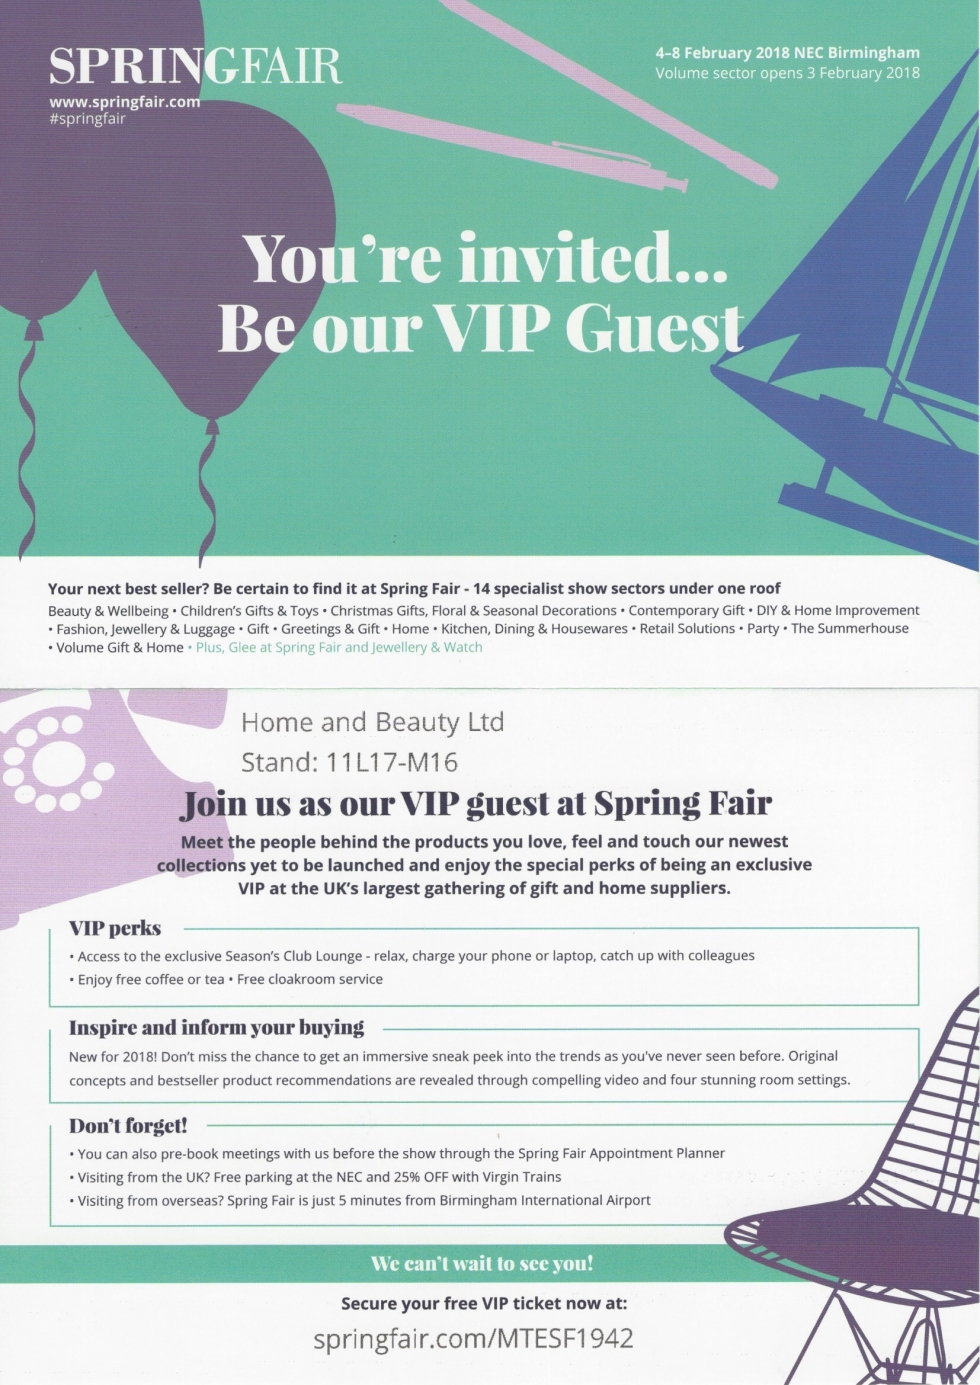 Visit the Spring Fair 2018 with 'VIP Perks' - Be our Guest   - Image